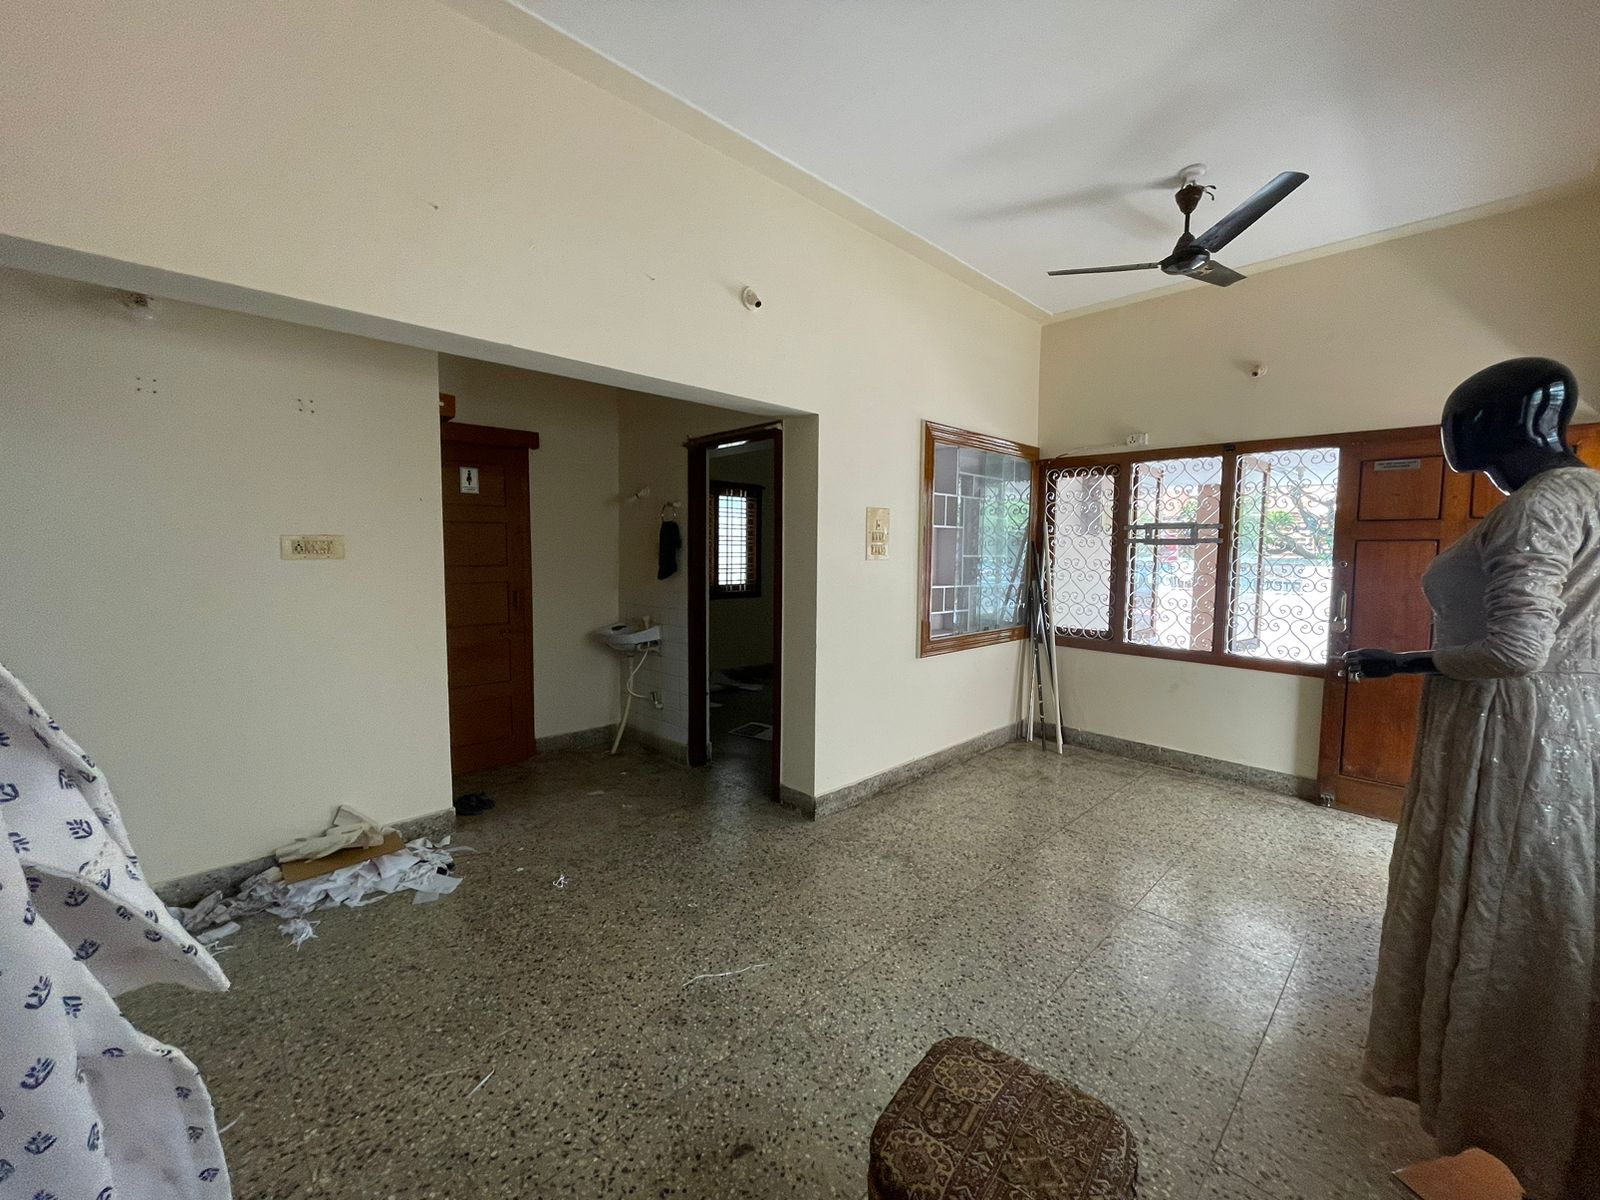 4 BHK Independent House for Lease Only at JAML2 - 3481-32lakh in Sanjay Nagar